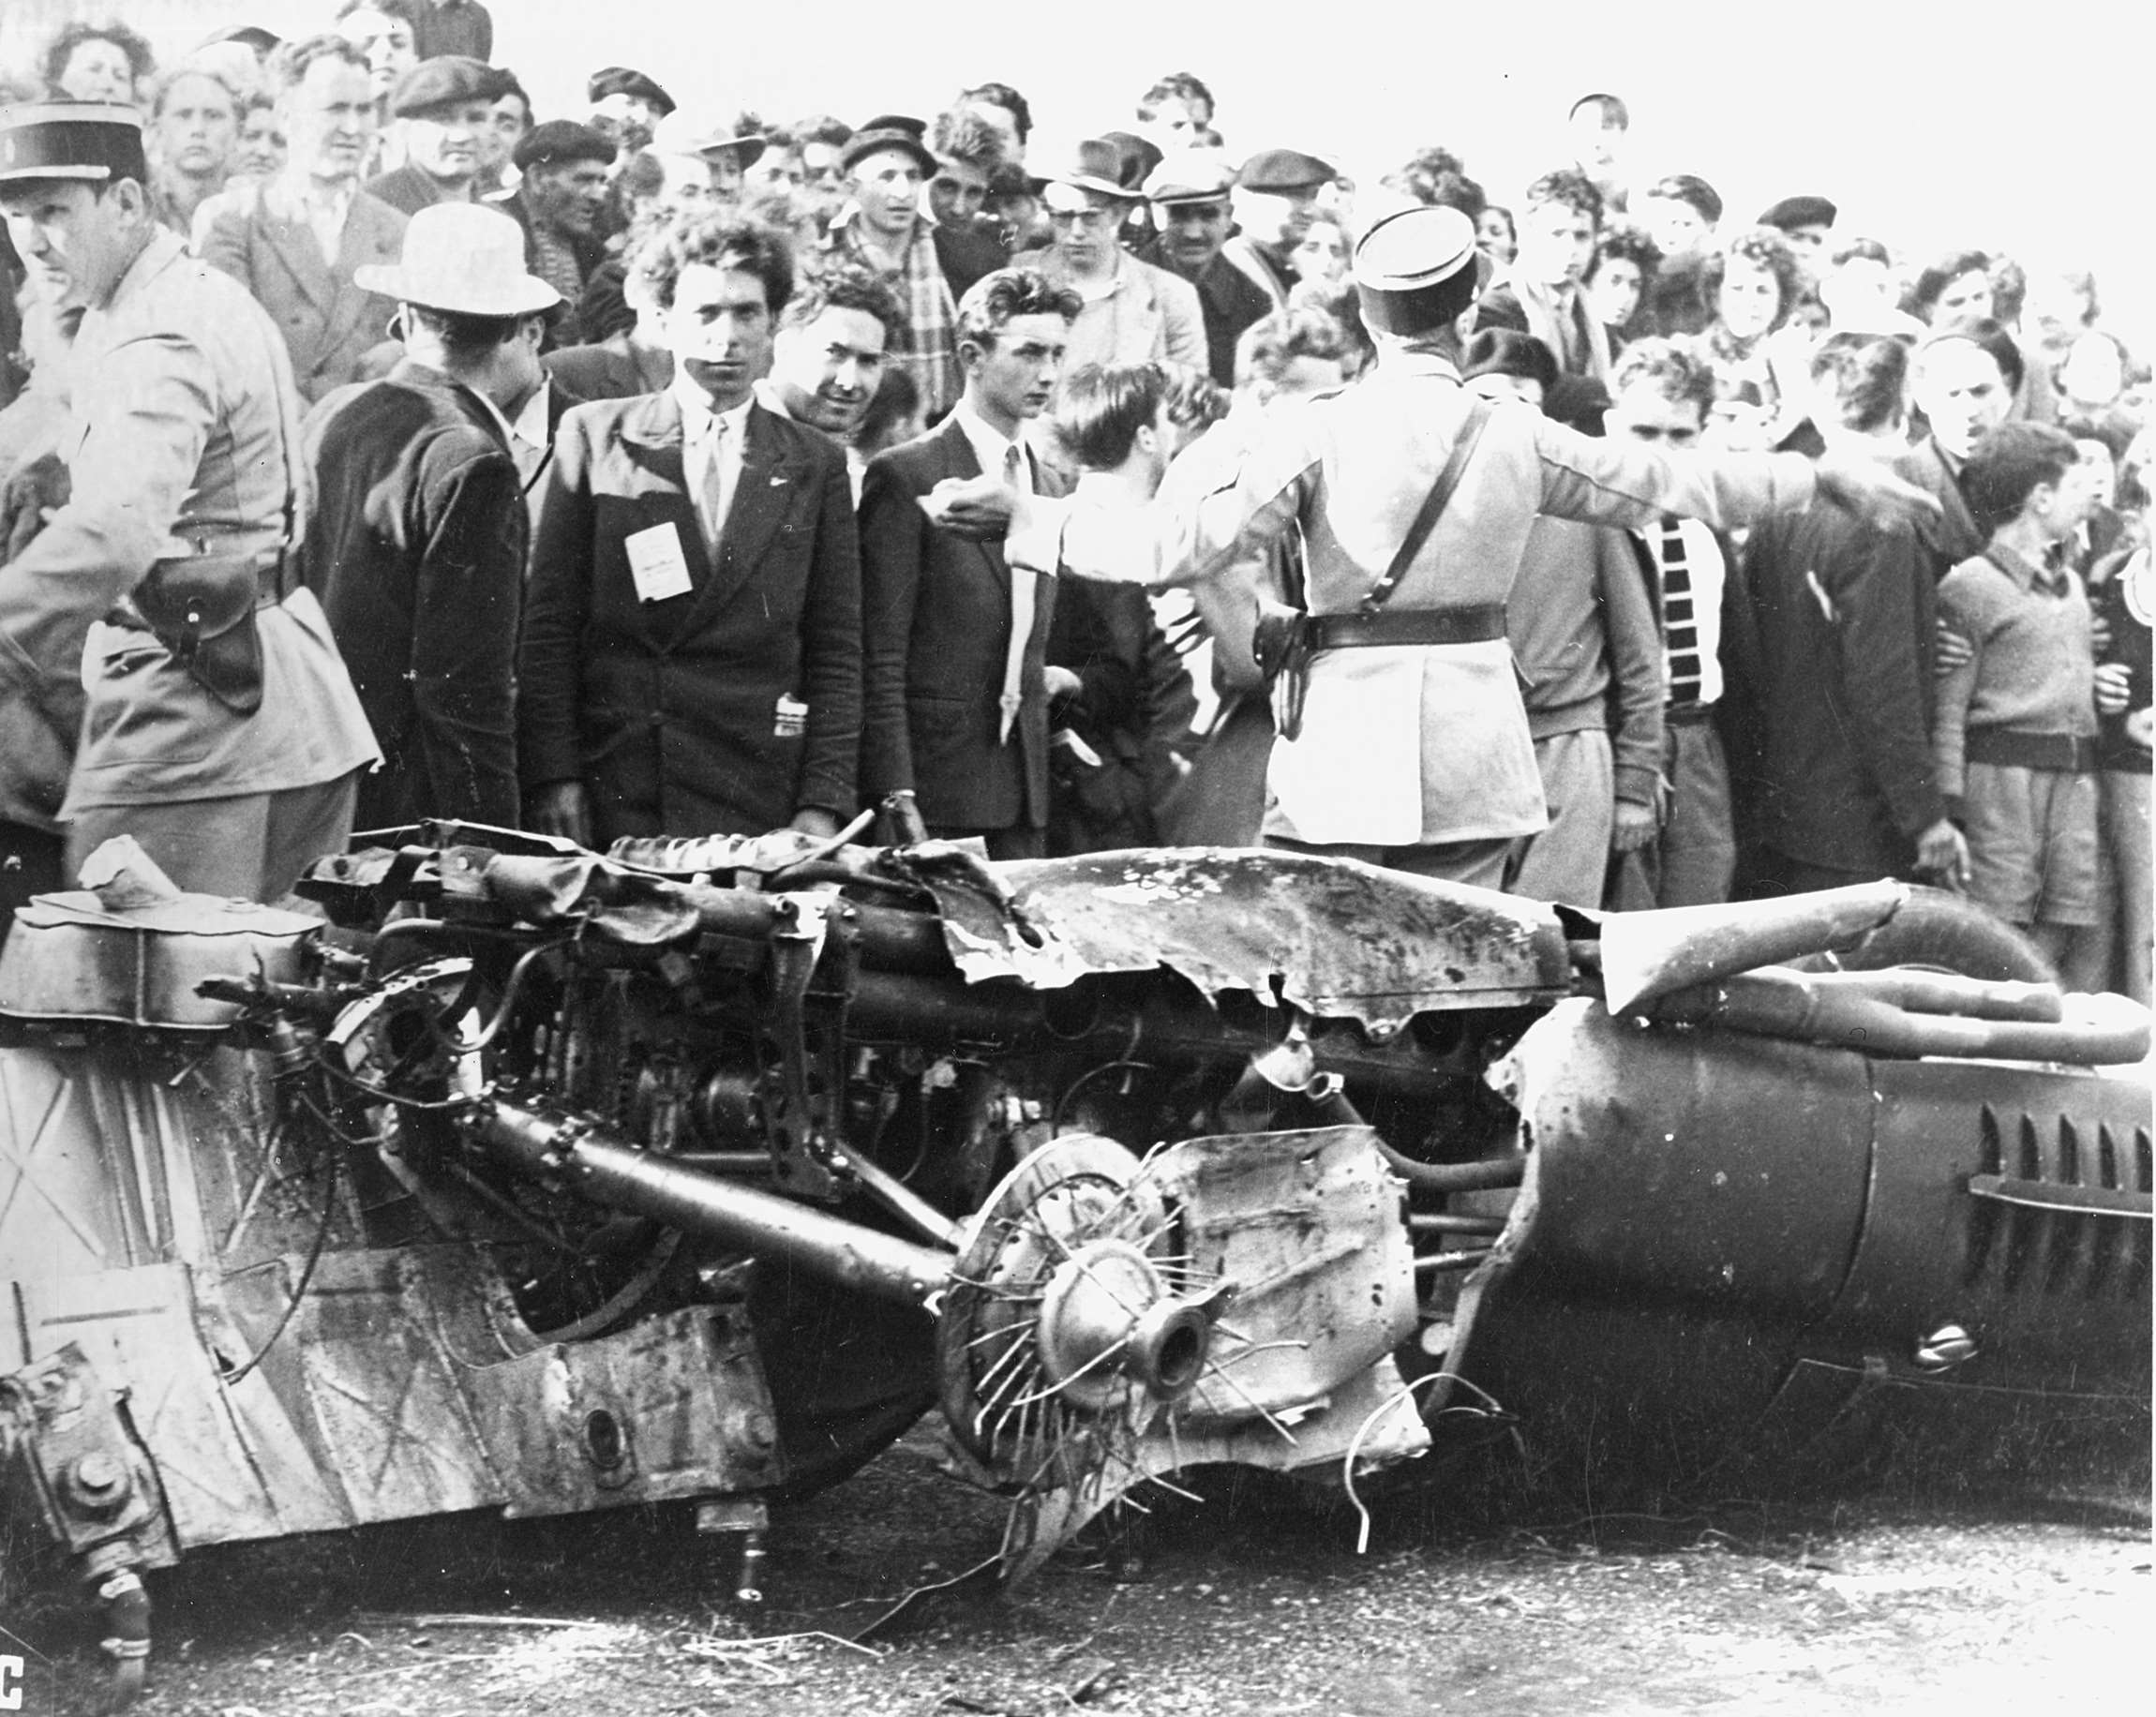 And here’s one we wrote off earlier - Ken Wharton’s V16 Mark 1 wreck at Albi, 1953 - he escaped with merely bruises and shock